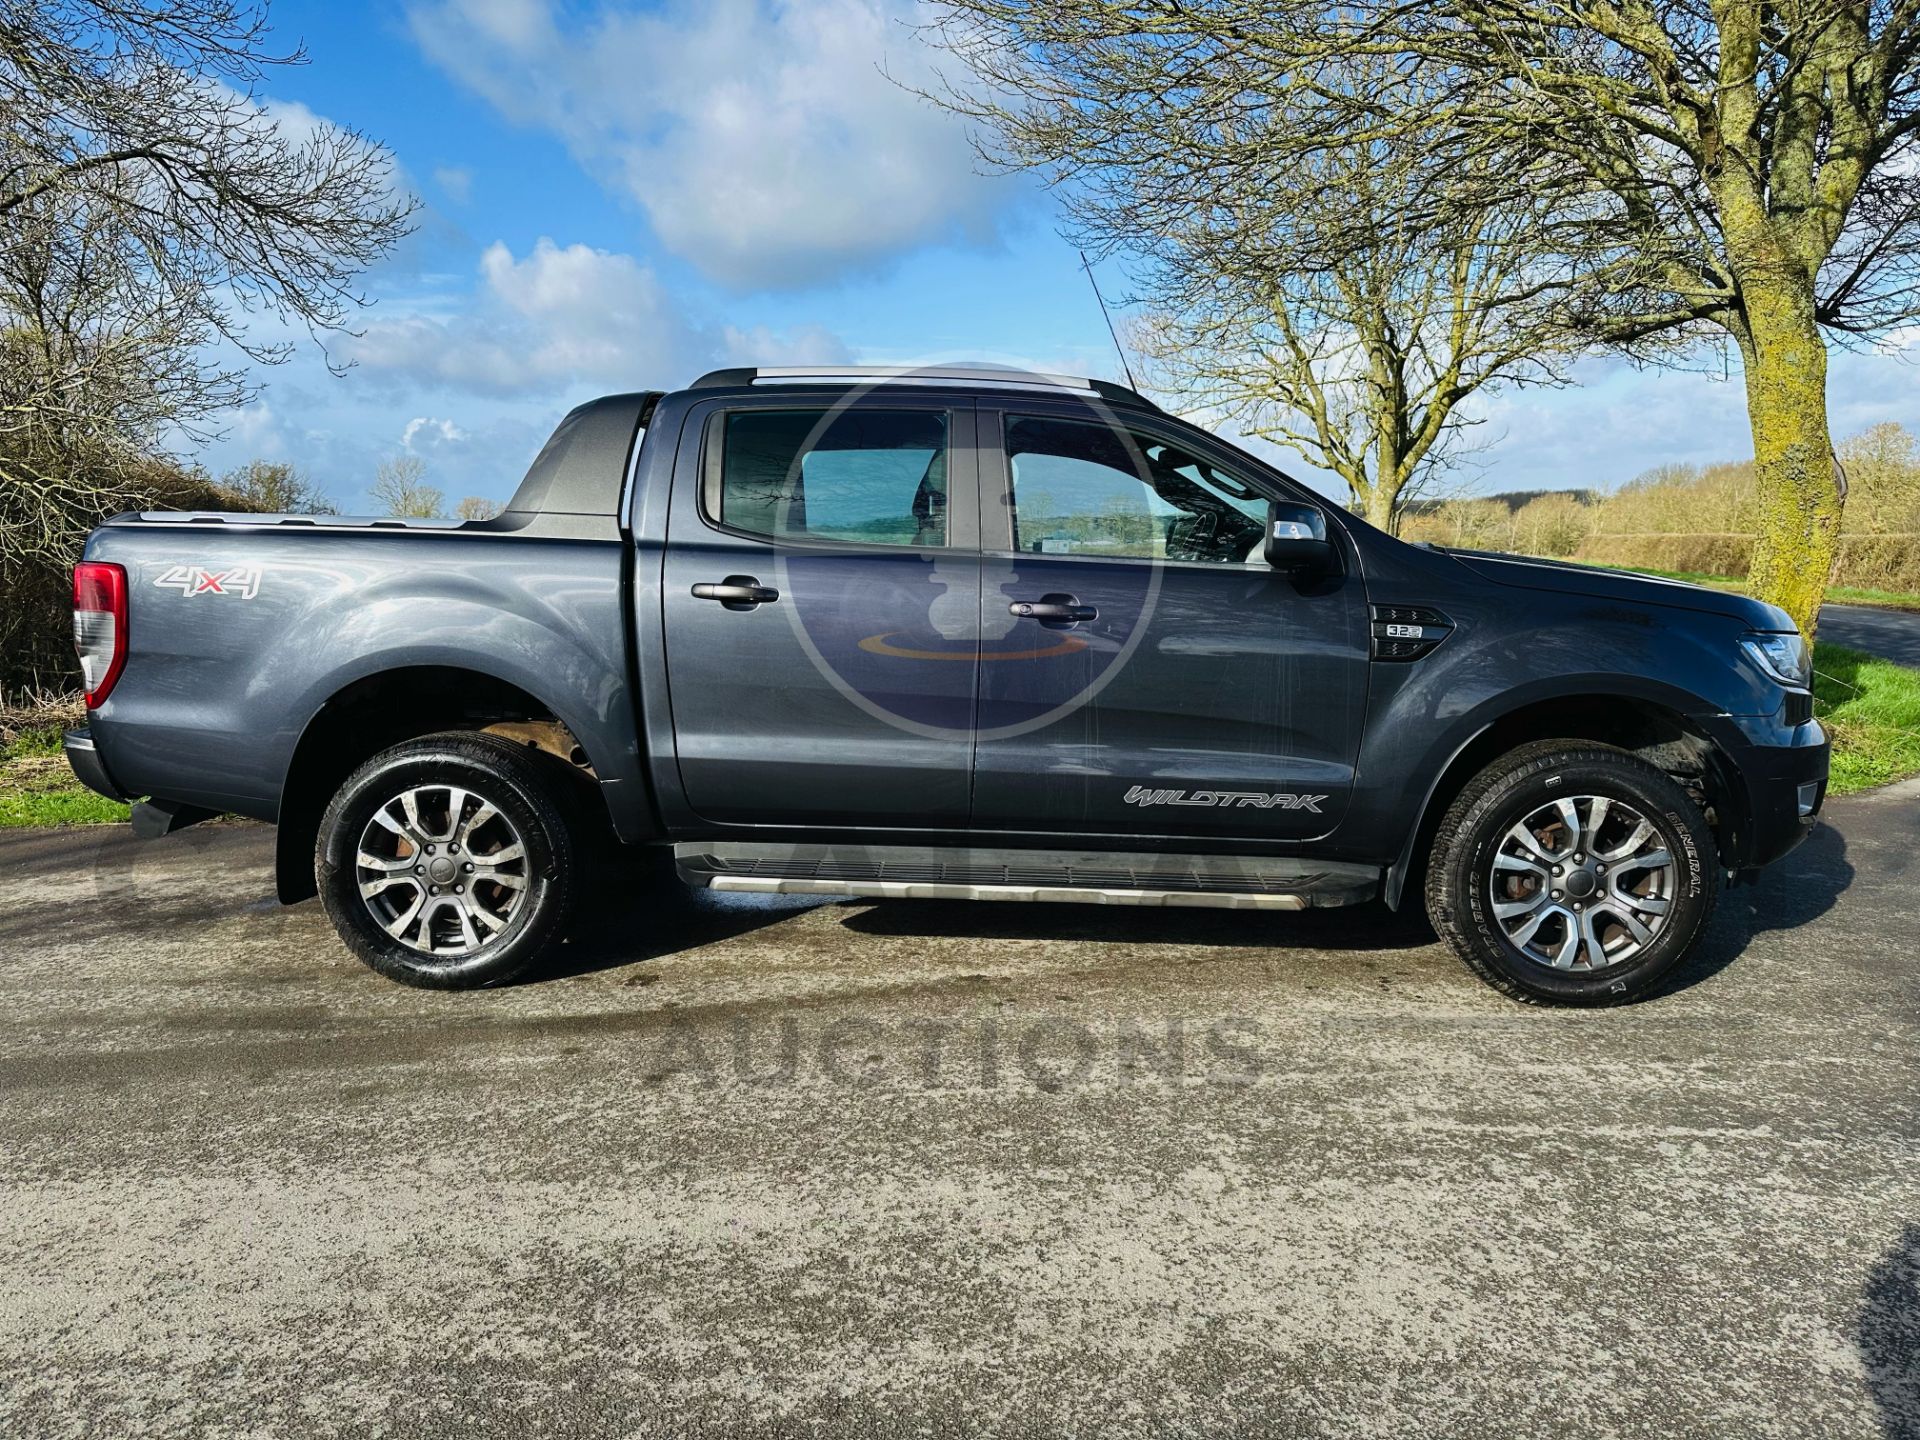 FORD RANGER *WILDTRAK EDITION* DOUBLE CAB PICK-UP (2018 - EURO 6) 3.2 TDCI - AUTOMATIC (1 OWNER) - Image 12 of 37